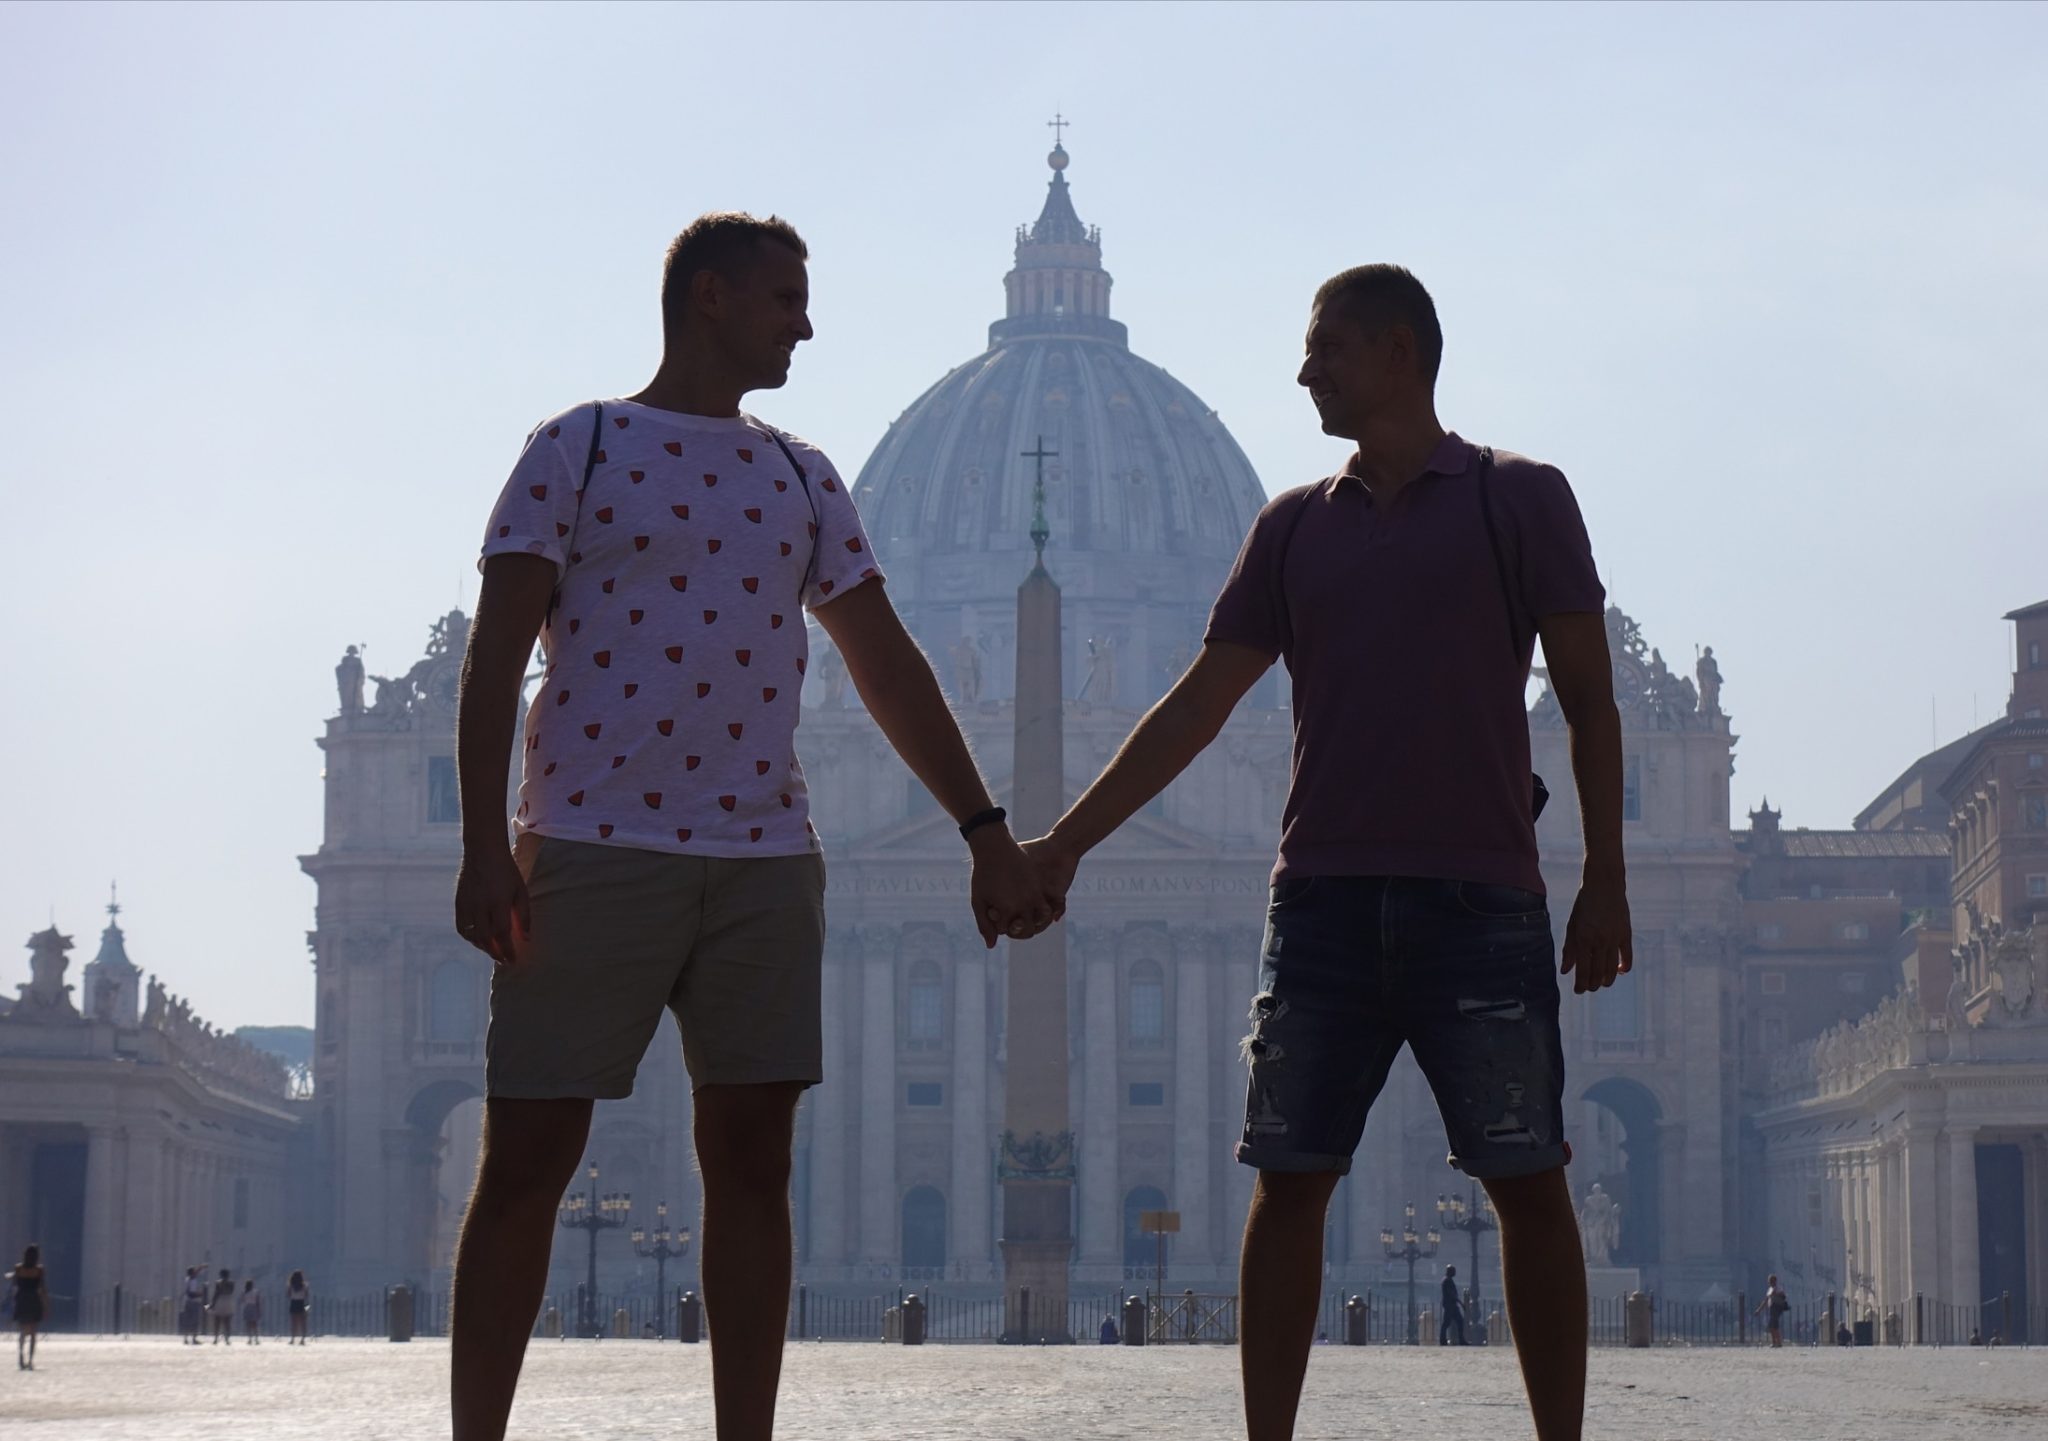 Polish Gay Couple Travel To The Vatican To Unfurl A Giant Pride Flag In Front Of Pope Francis